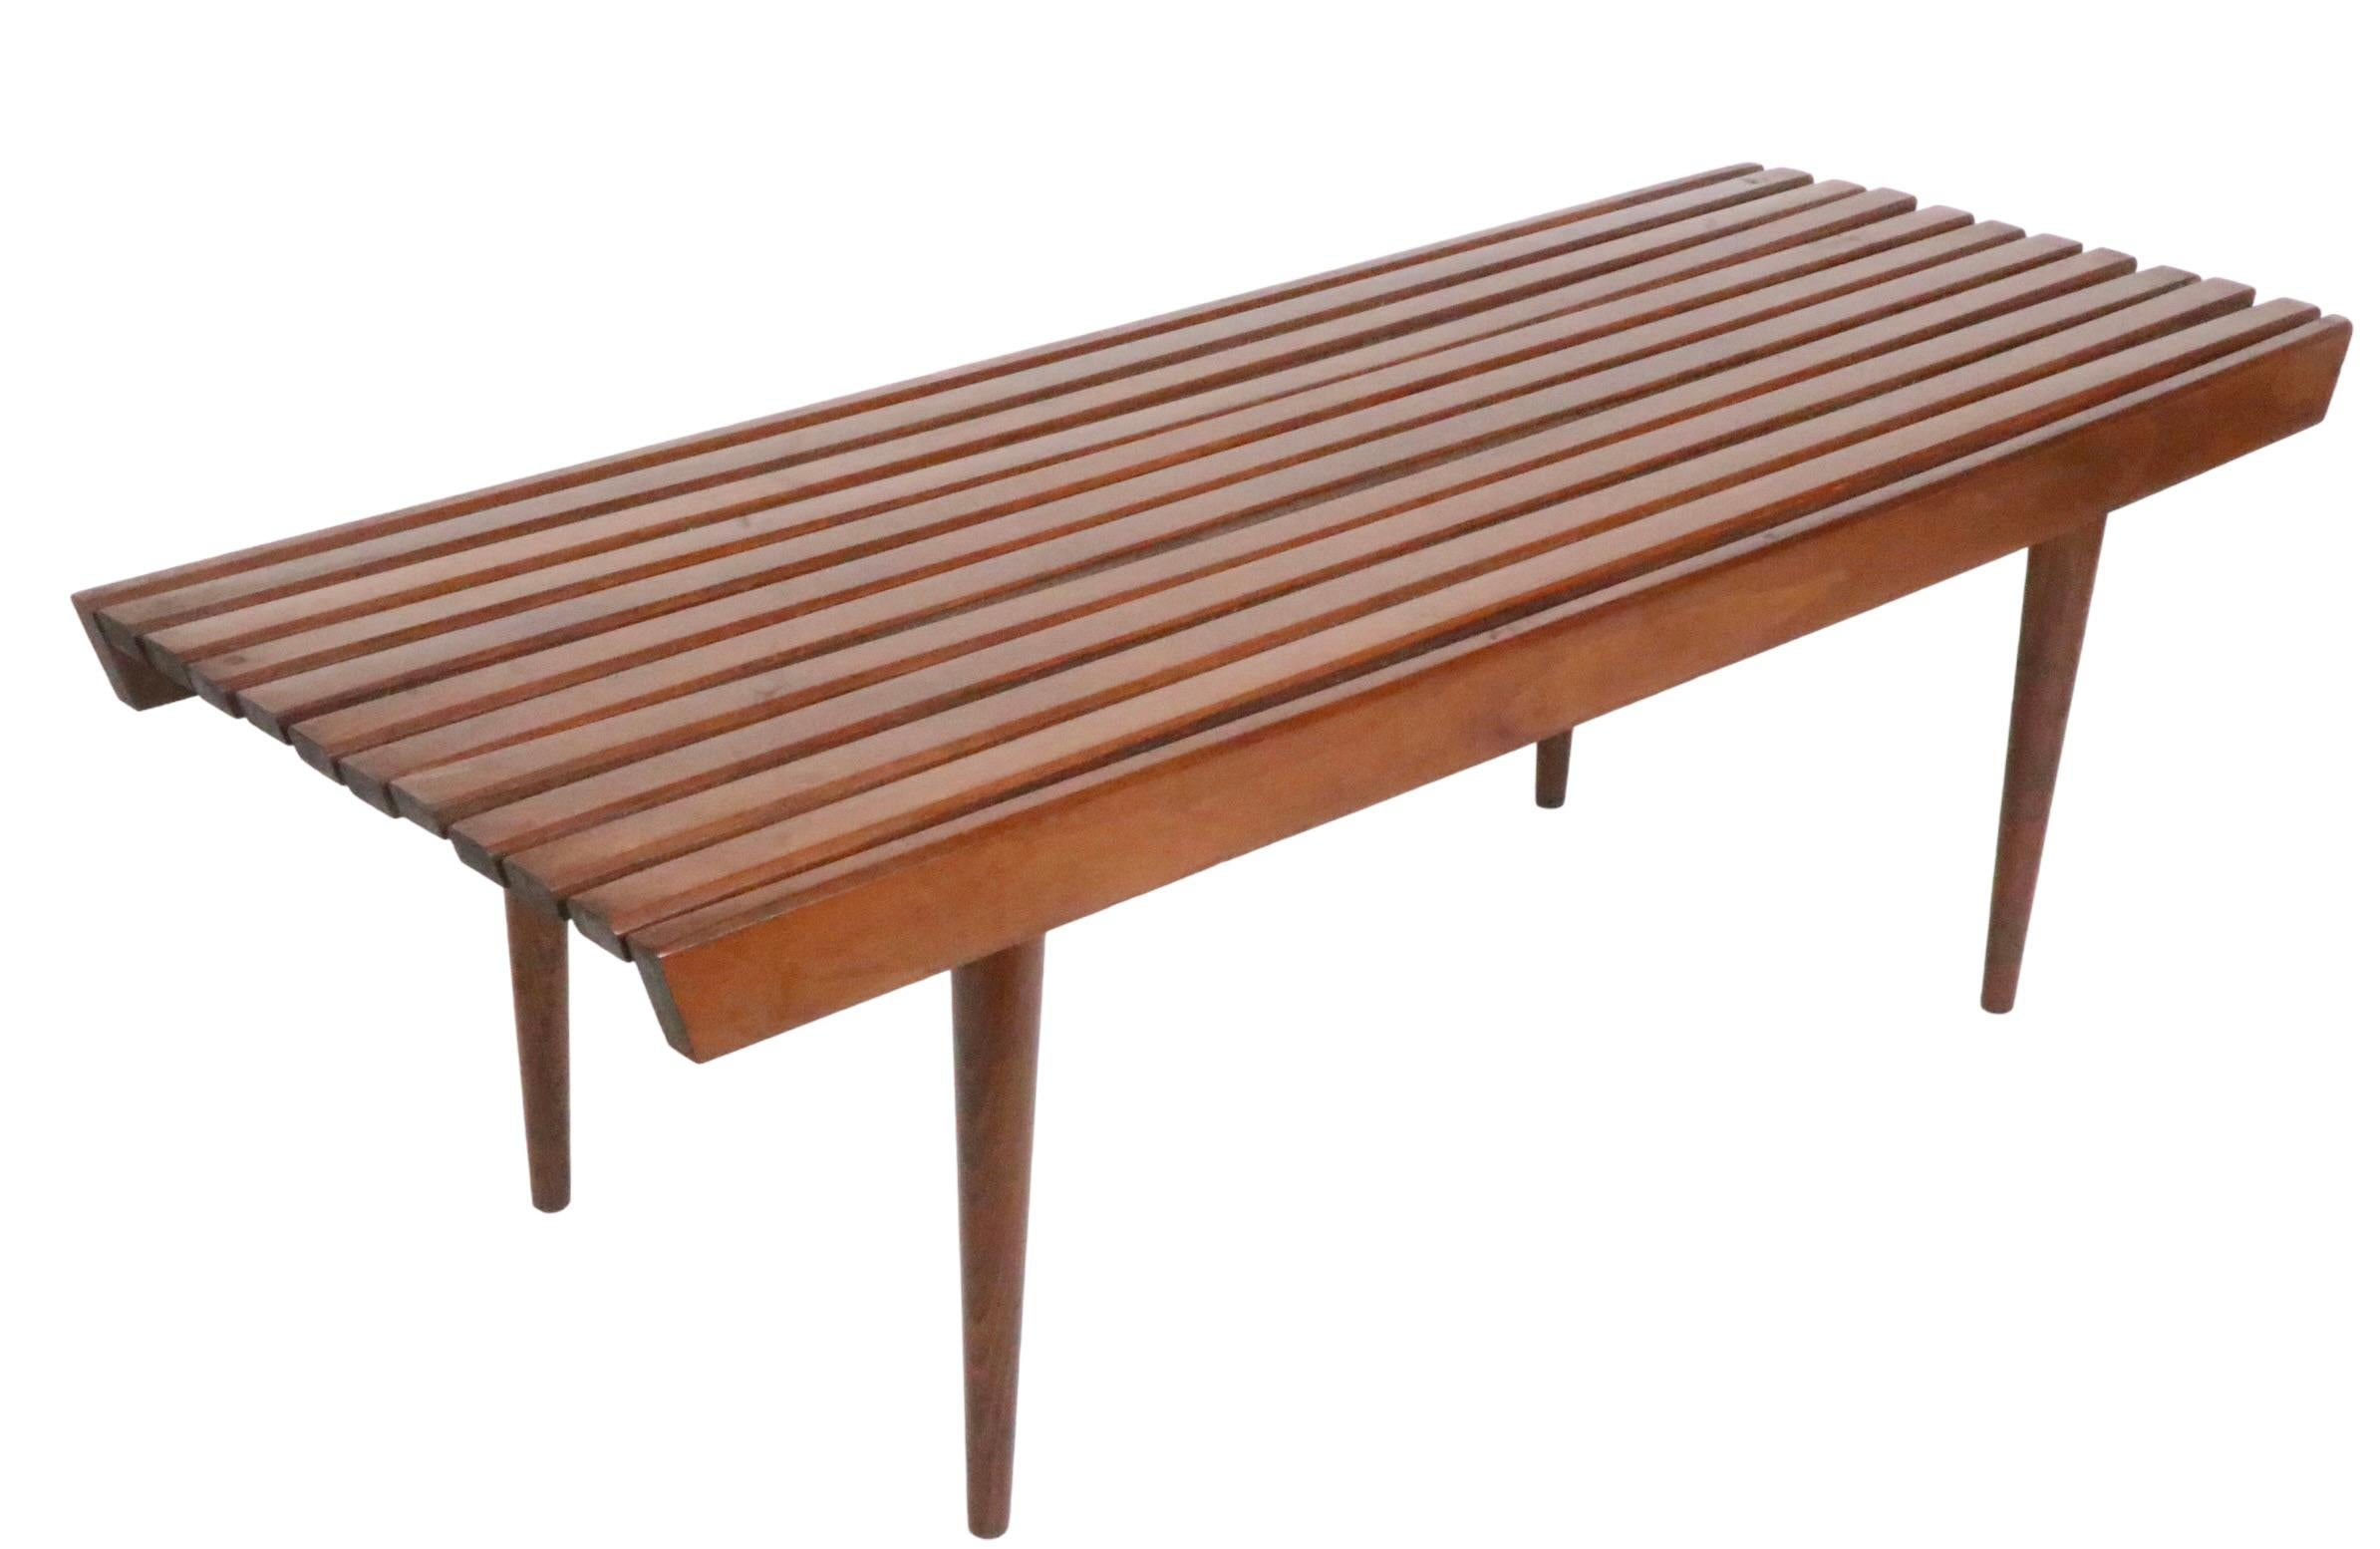 Wood Mid Century Slat Bench Coffee Table Made in Yugoslavia C 1950s For Sale